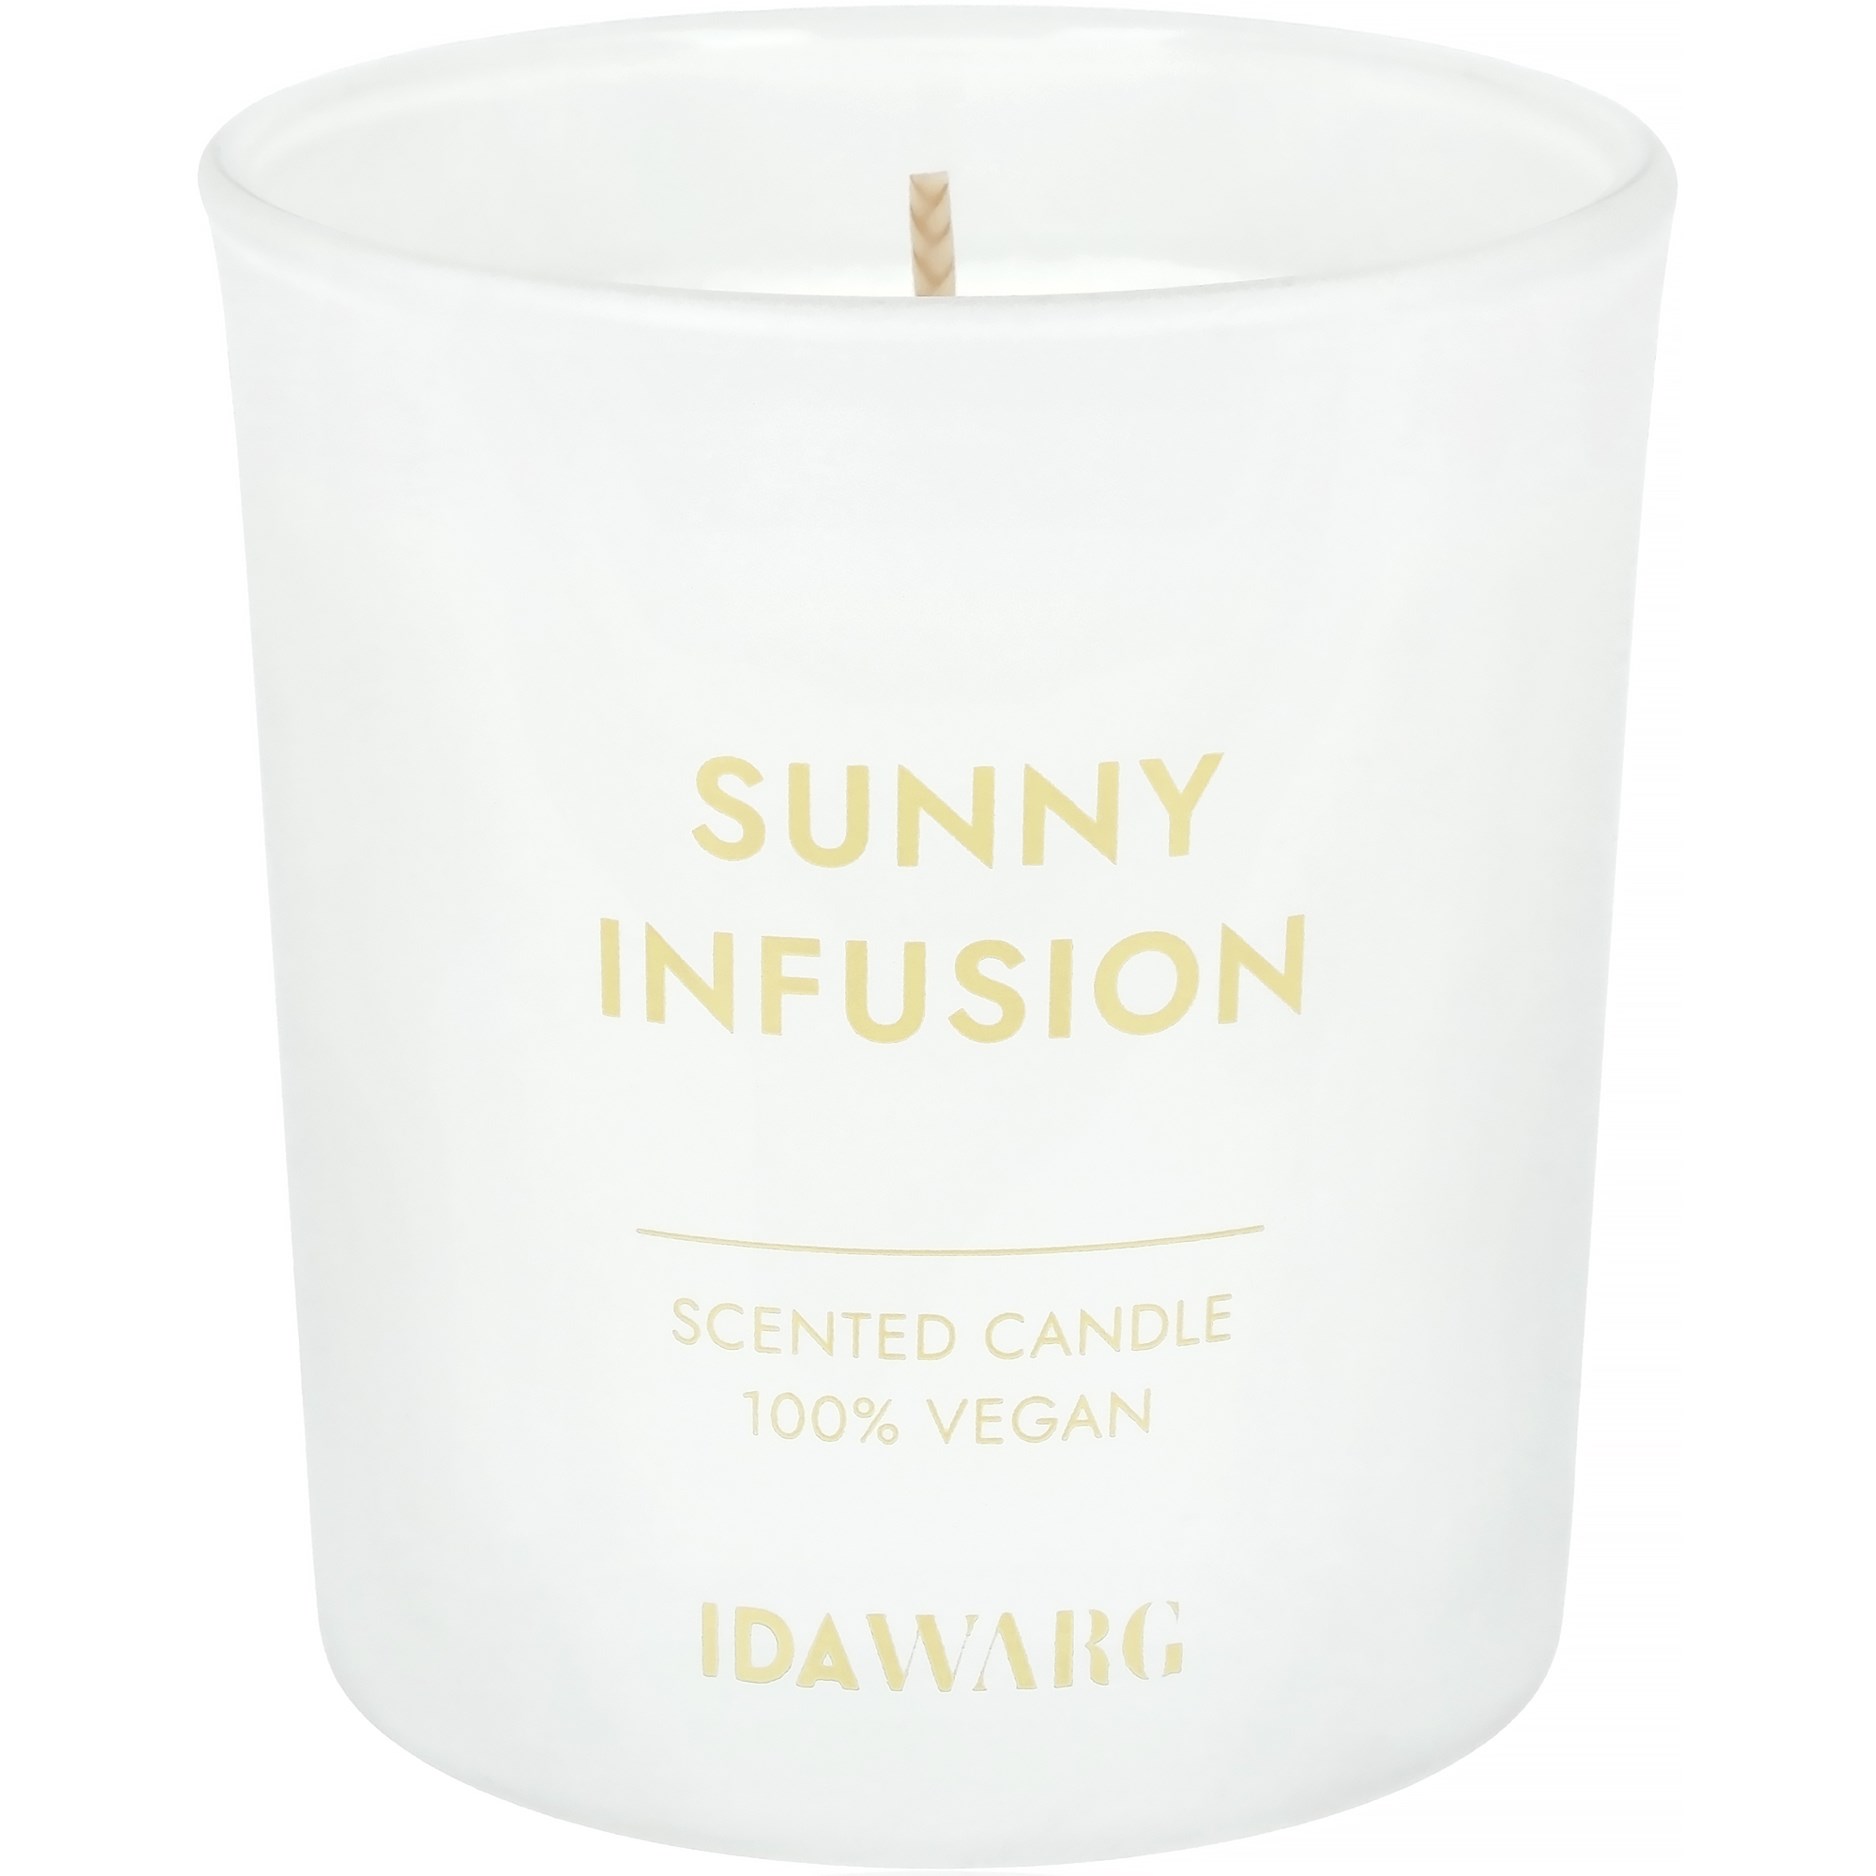 Läs mer om Ida Warg Sunny Infusion Scented Candle